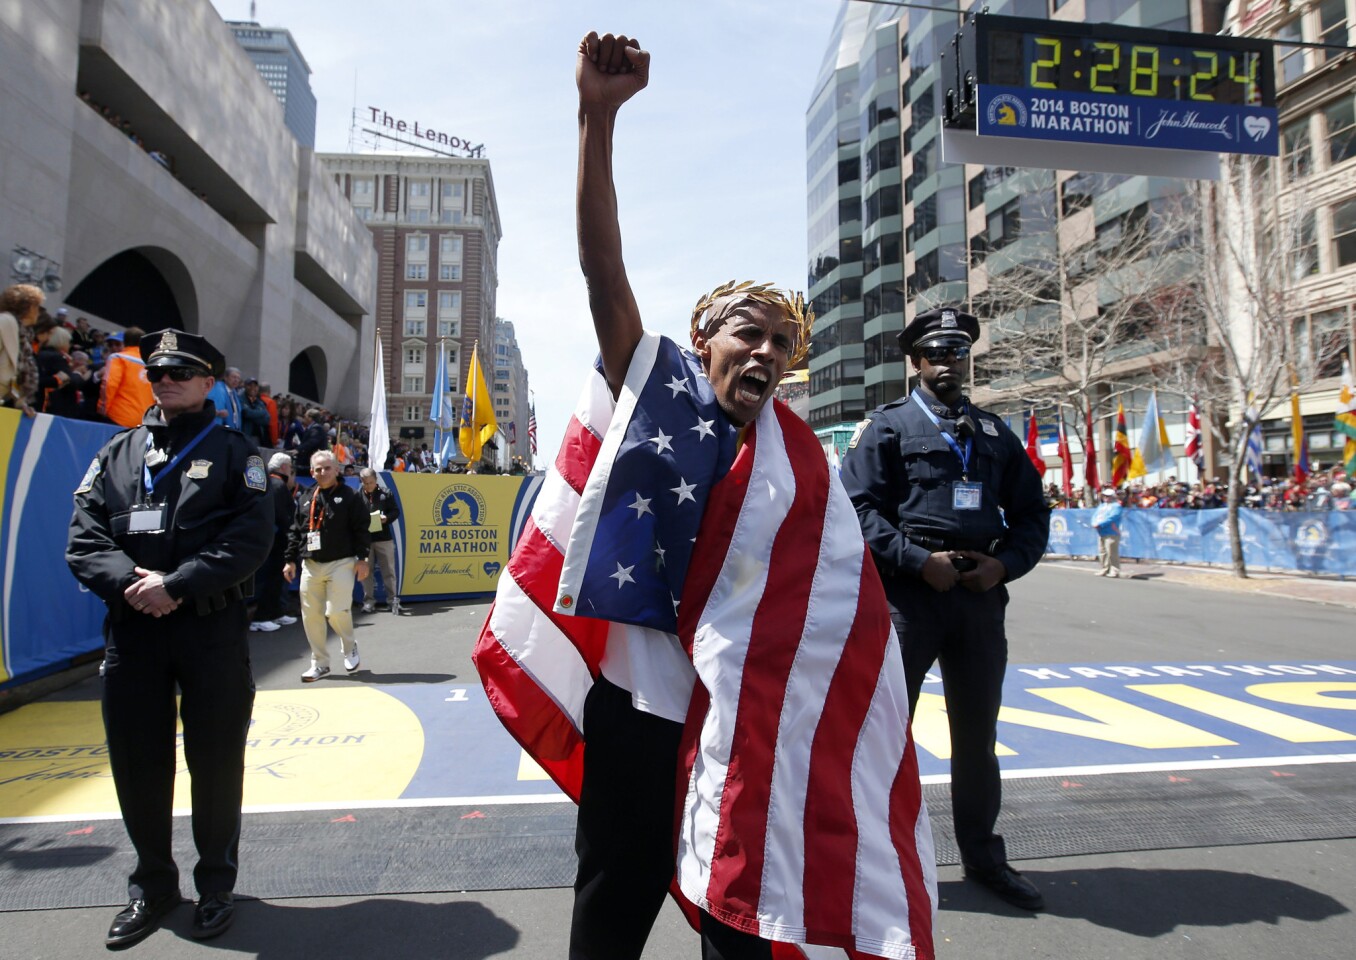 Meb Keflezighi of San Diego celebrates his victory in the 118th Boston Marathon on April 19, a year after deadly bombings struck the event. Keflezighi became the first American man to win the race since 1983.